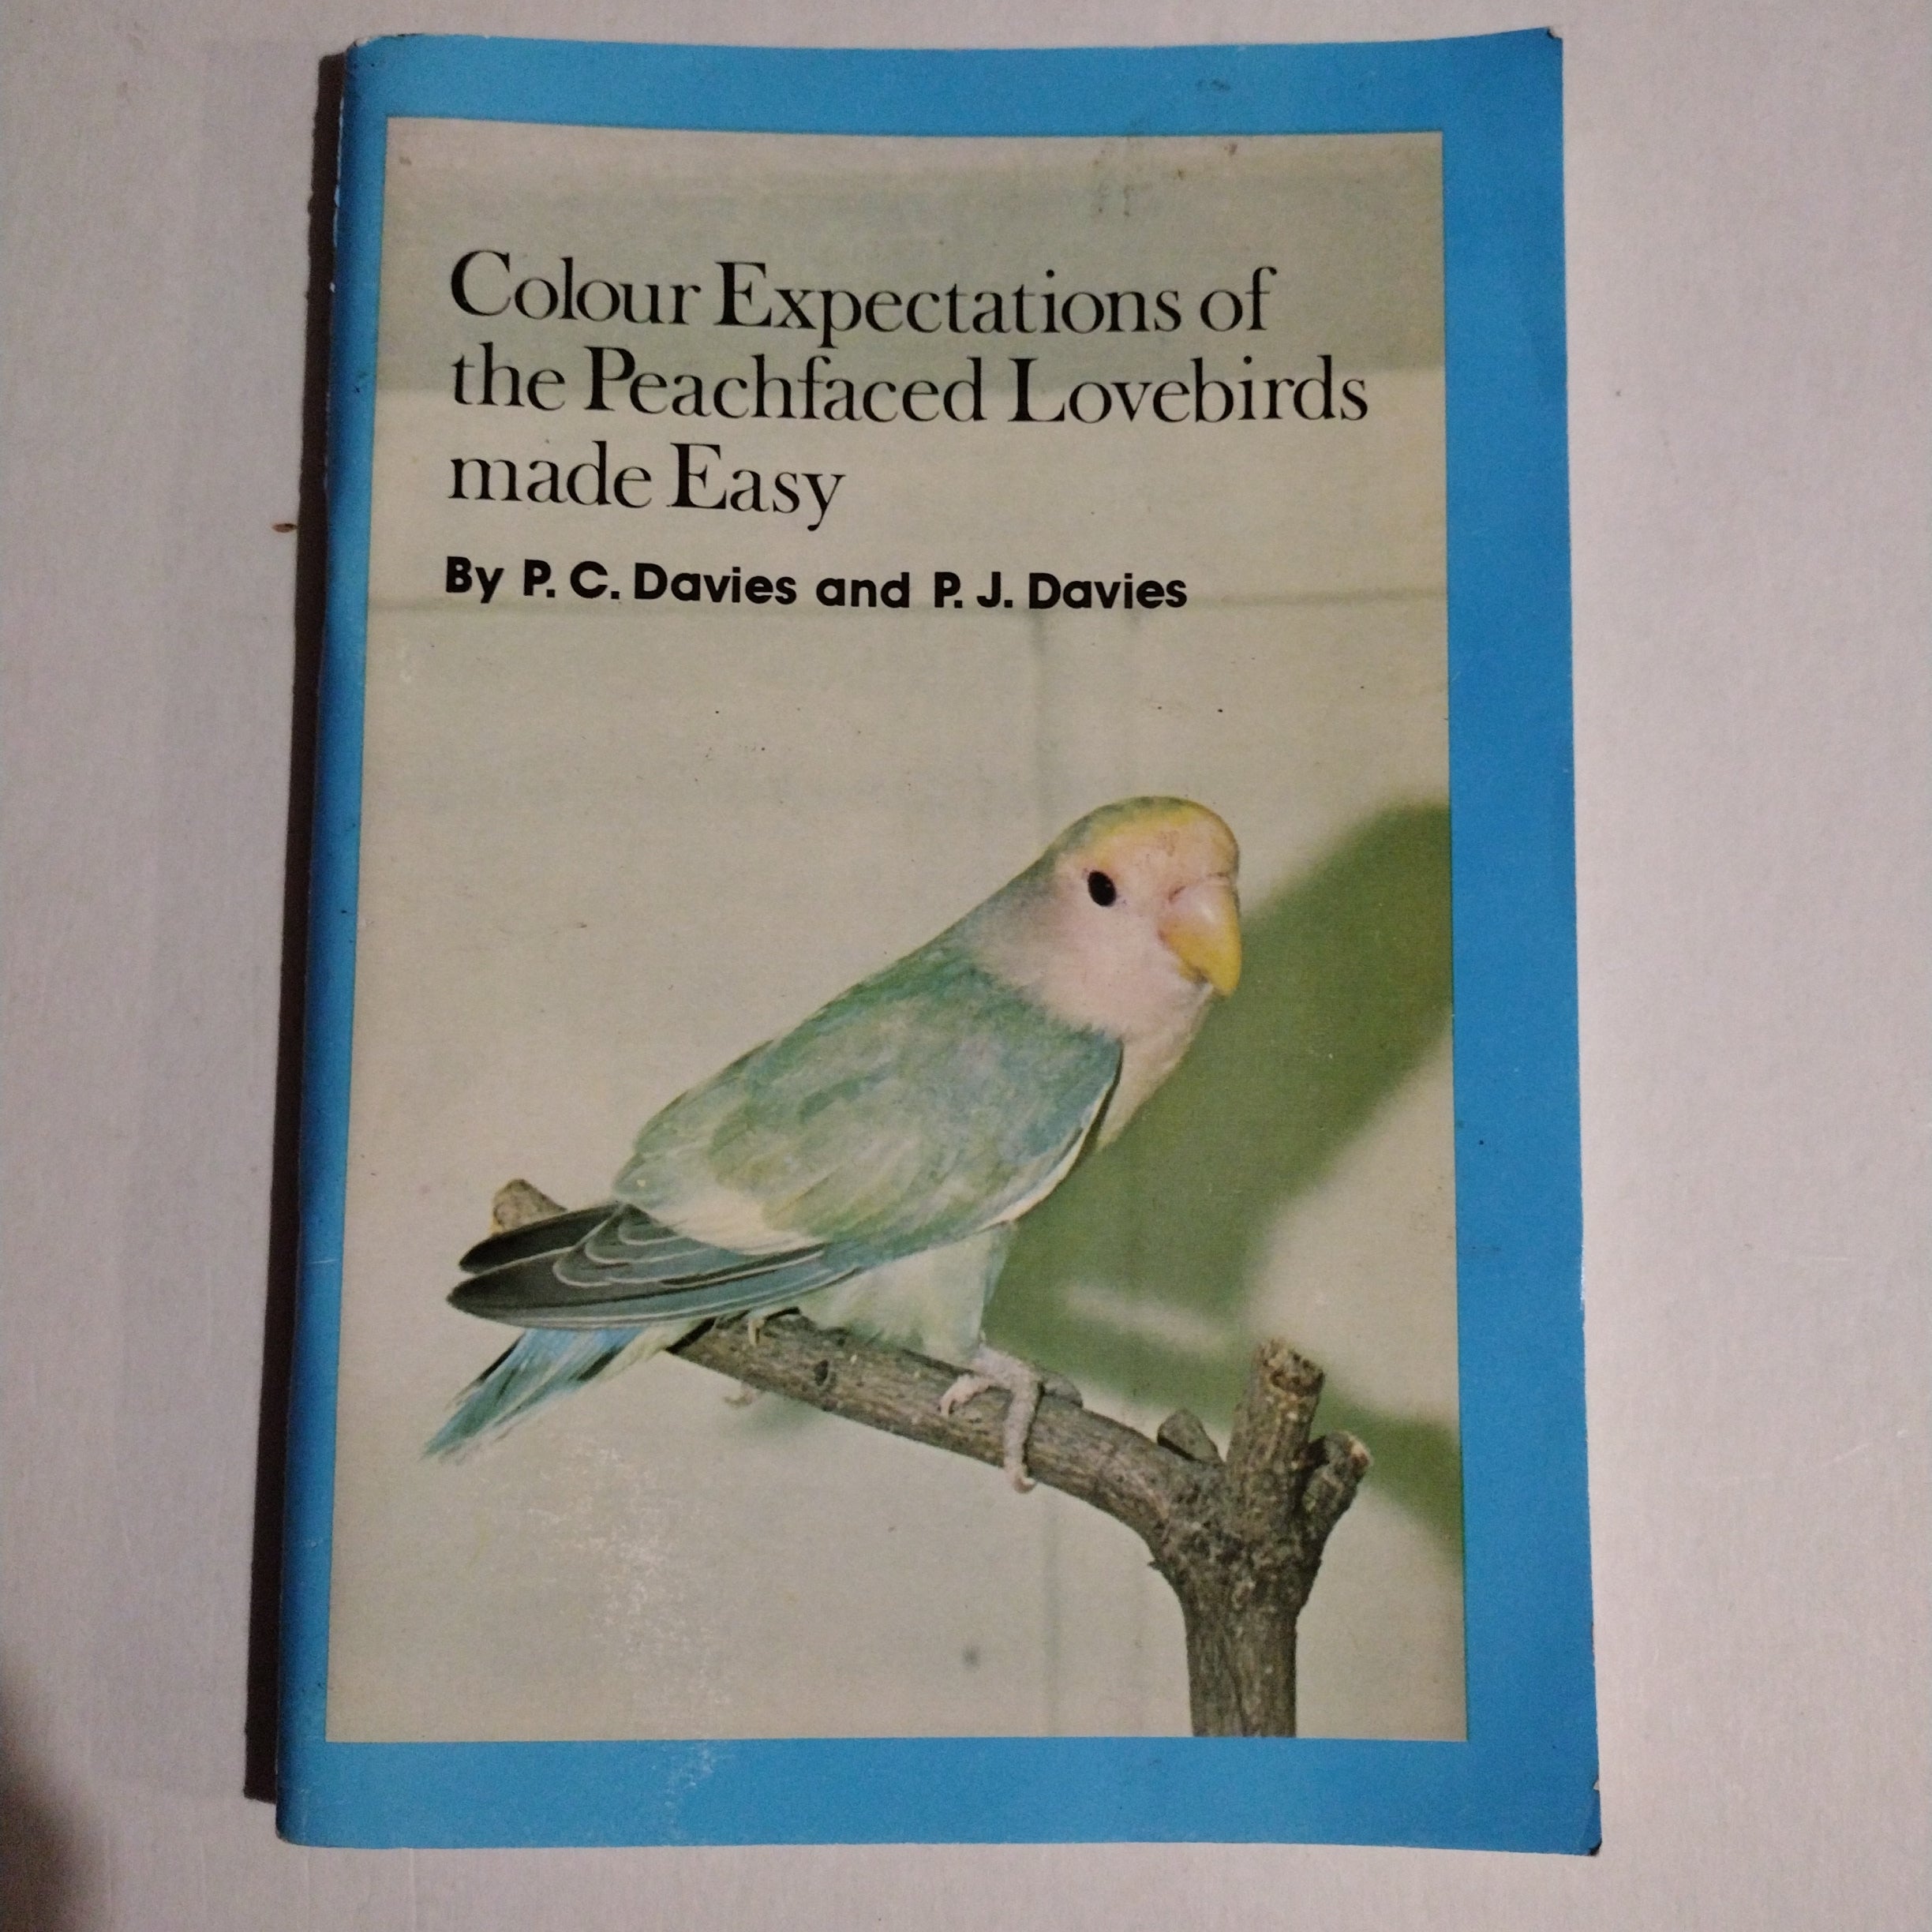 Colour Expectations Of The Peachfaced Lovebirds Made Easy

 by P C Davies and P J Davies